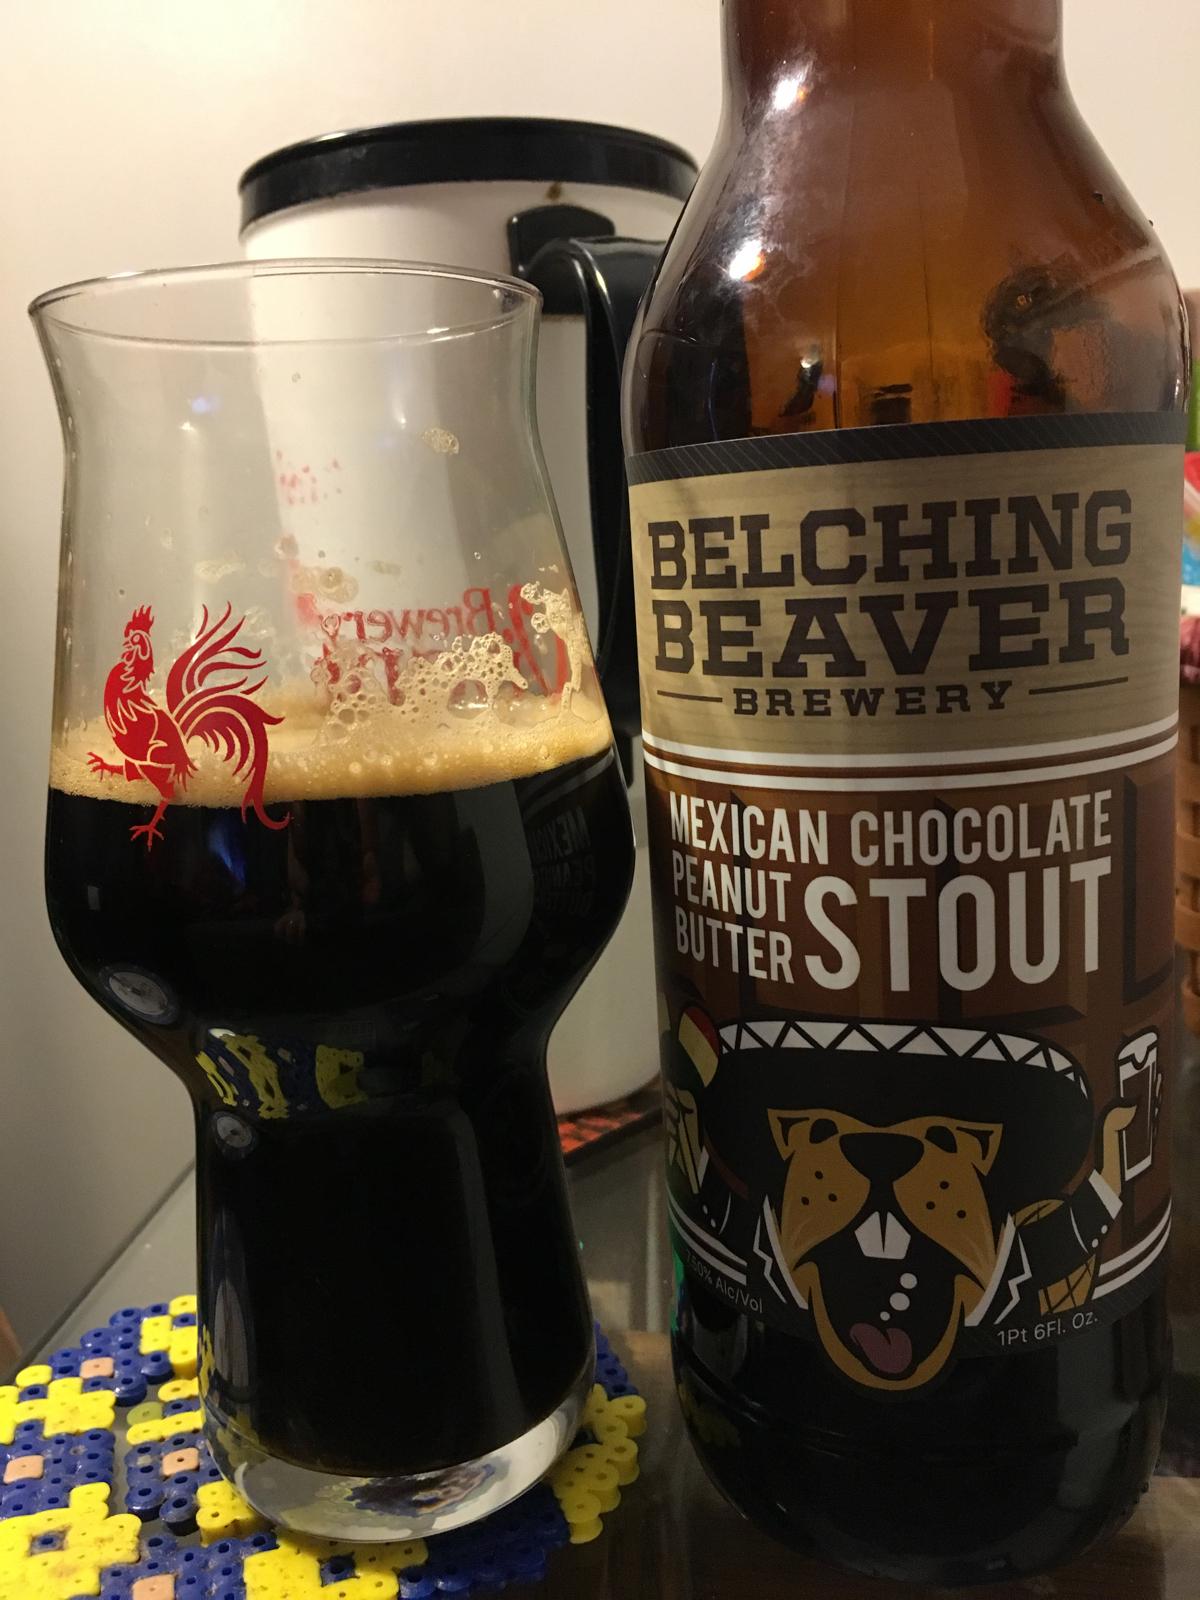 Mexican Chocolate Peanut Butter Stout